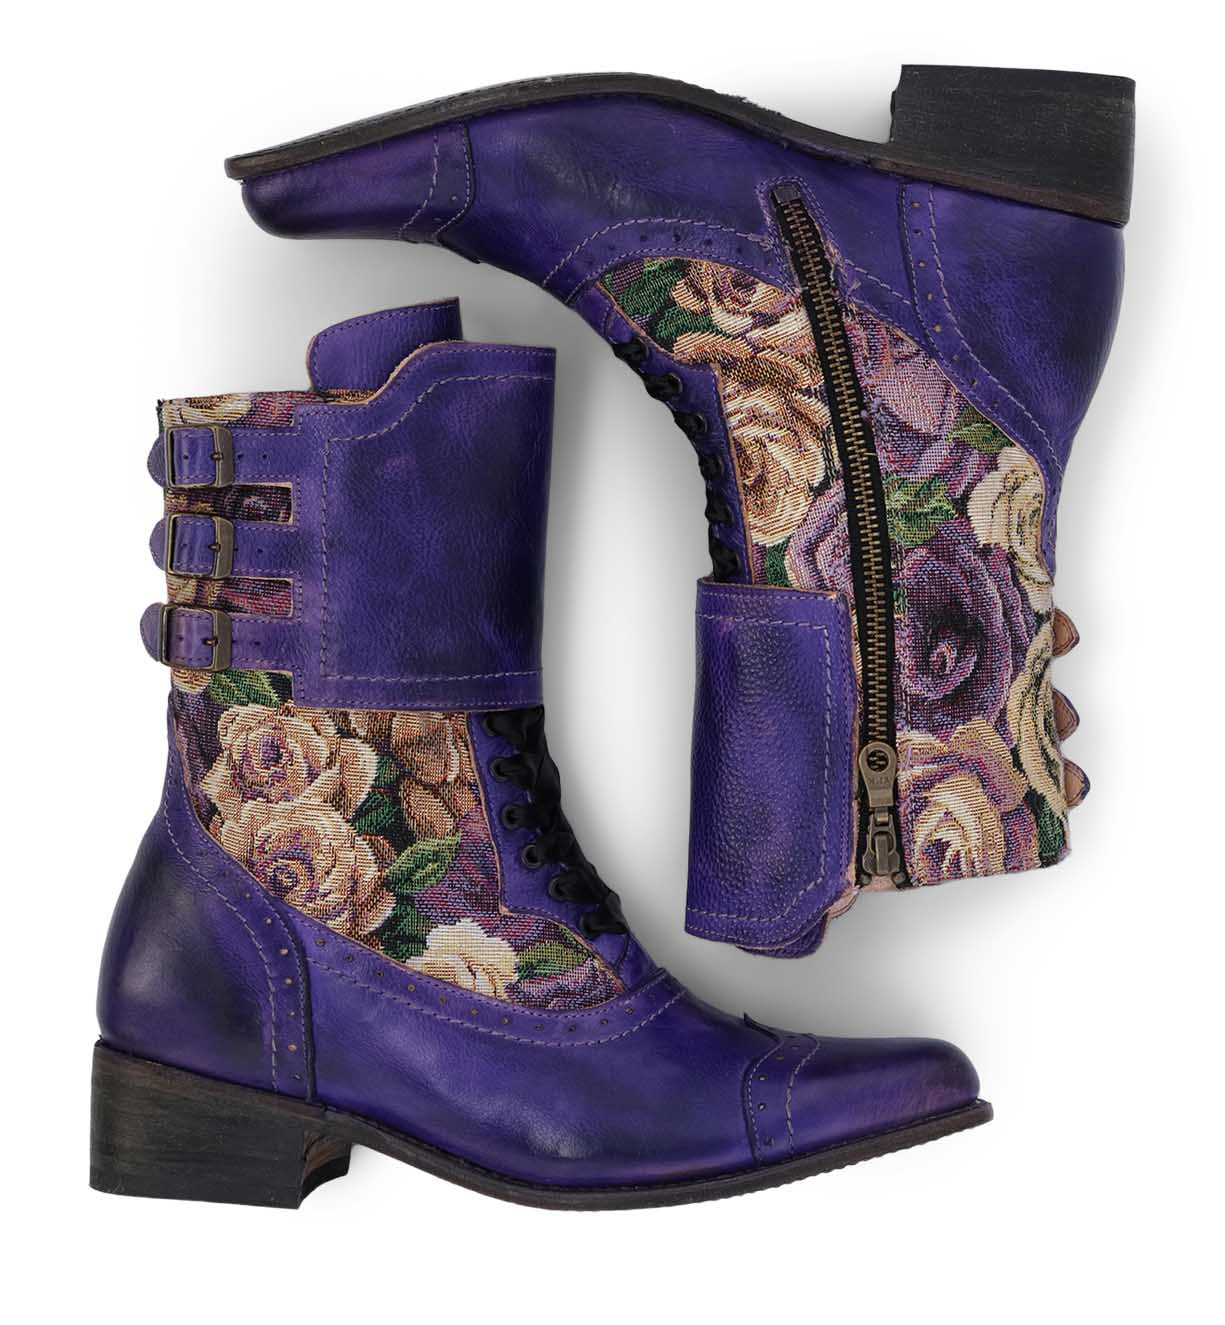 Exquisite craftsmanship meets beauty in this pair of Oak Tree Farms Faye purple leather boots adorned with roses.